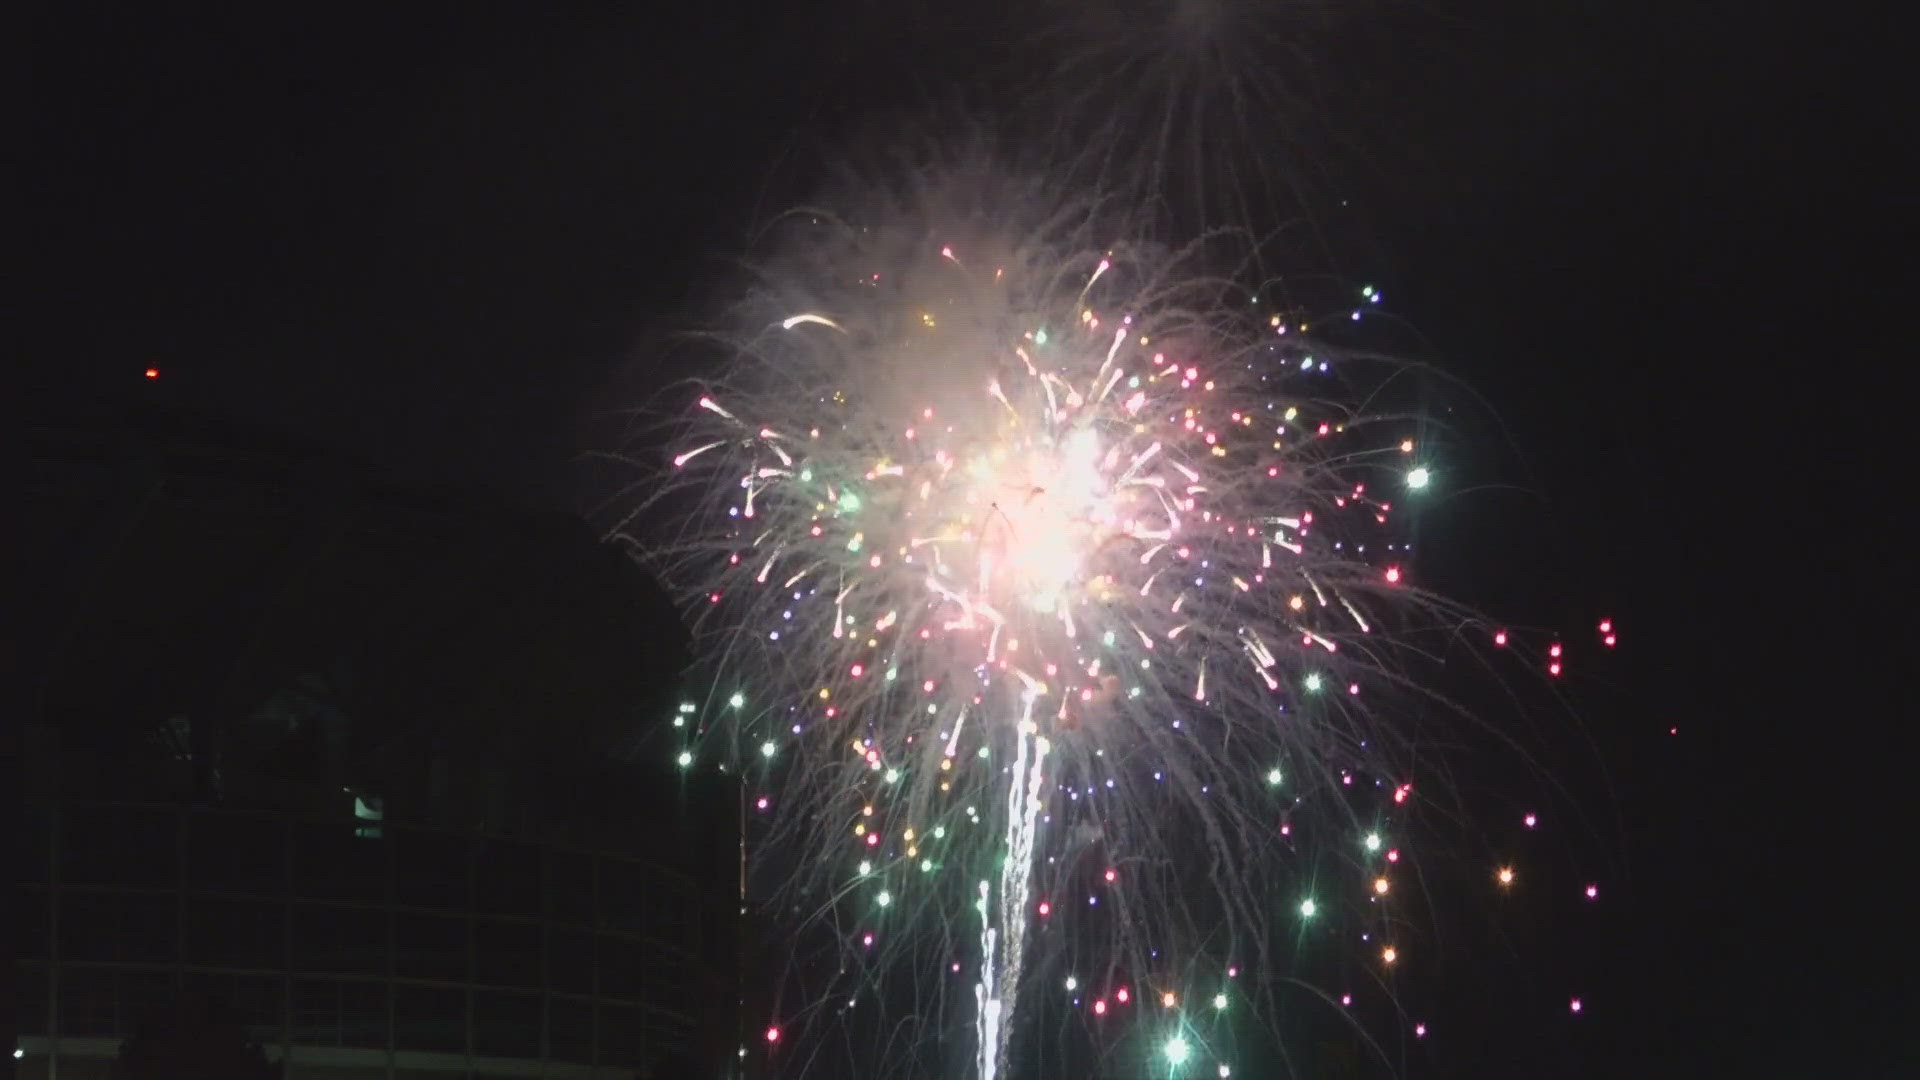 Officials are working to both combat crime and deter illegal fireworks displays.